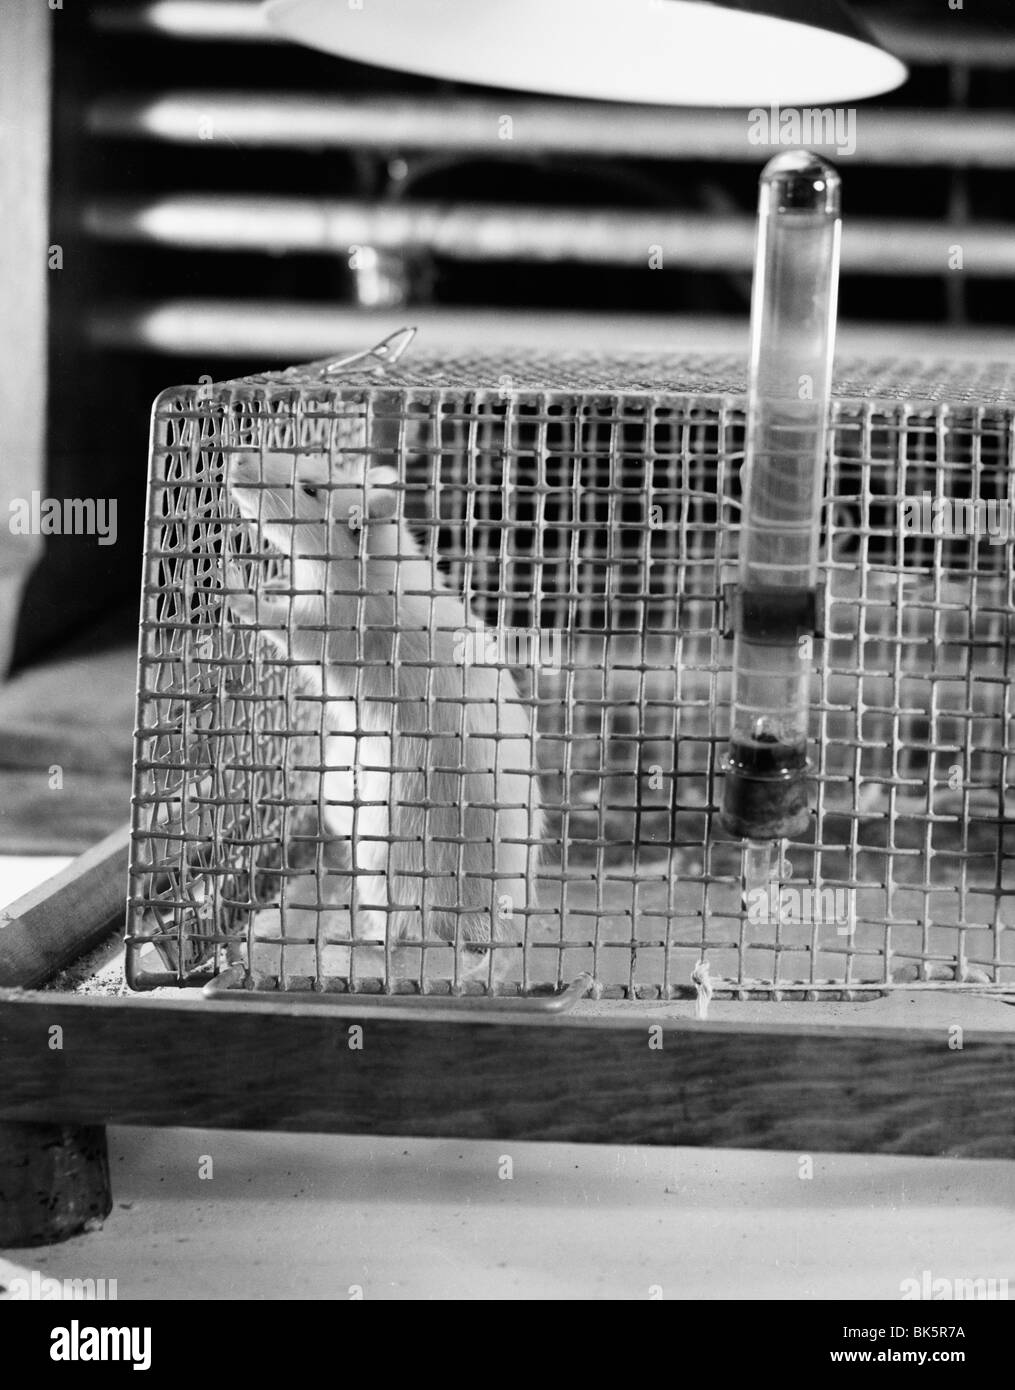 Close-up of a mouse in a cage Stock Photo